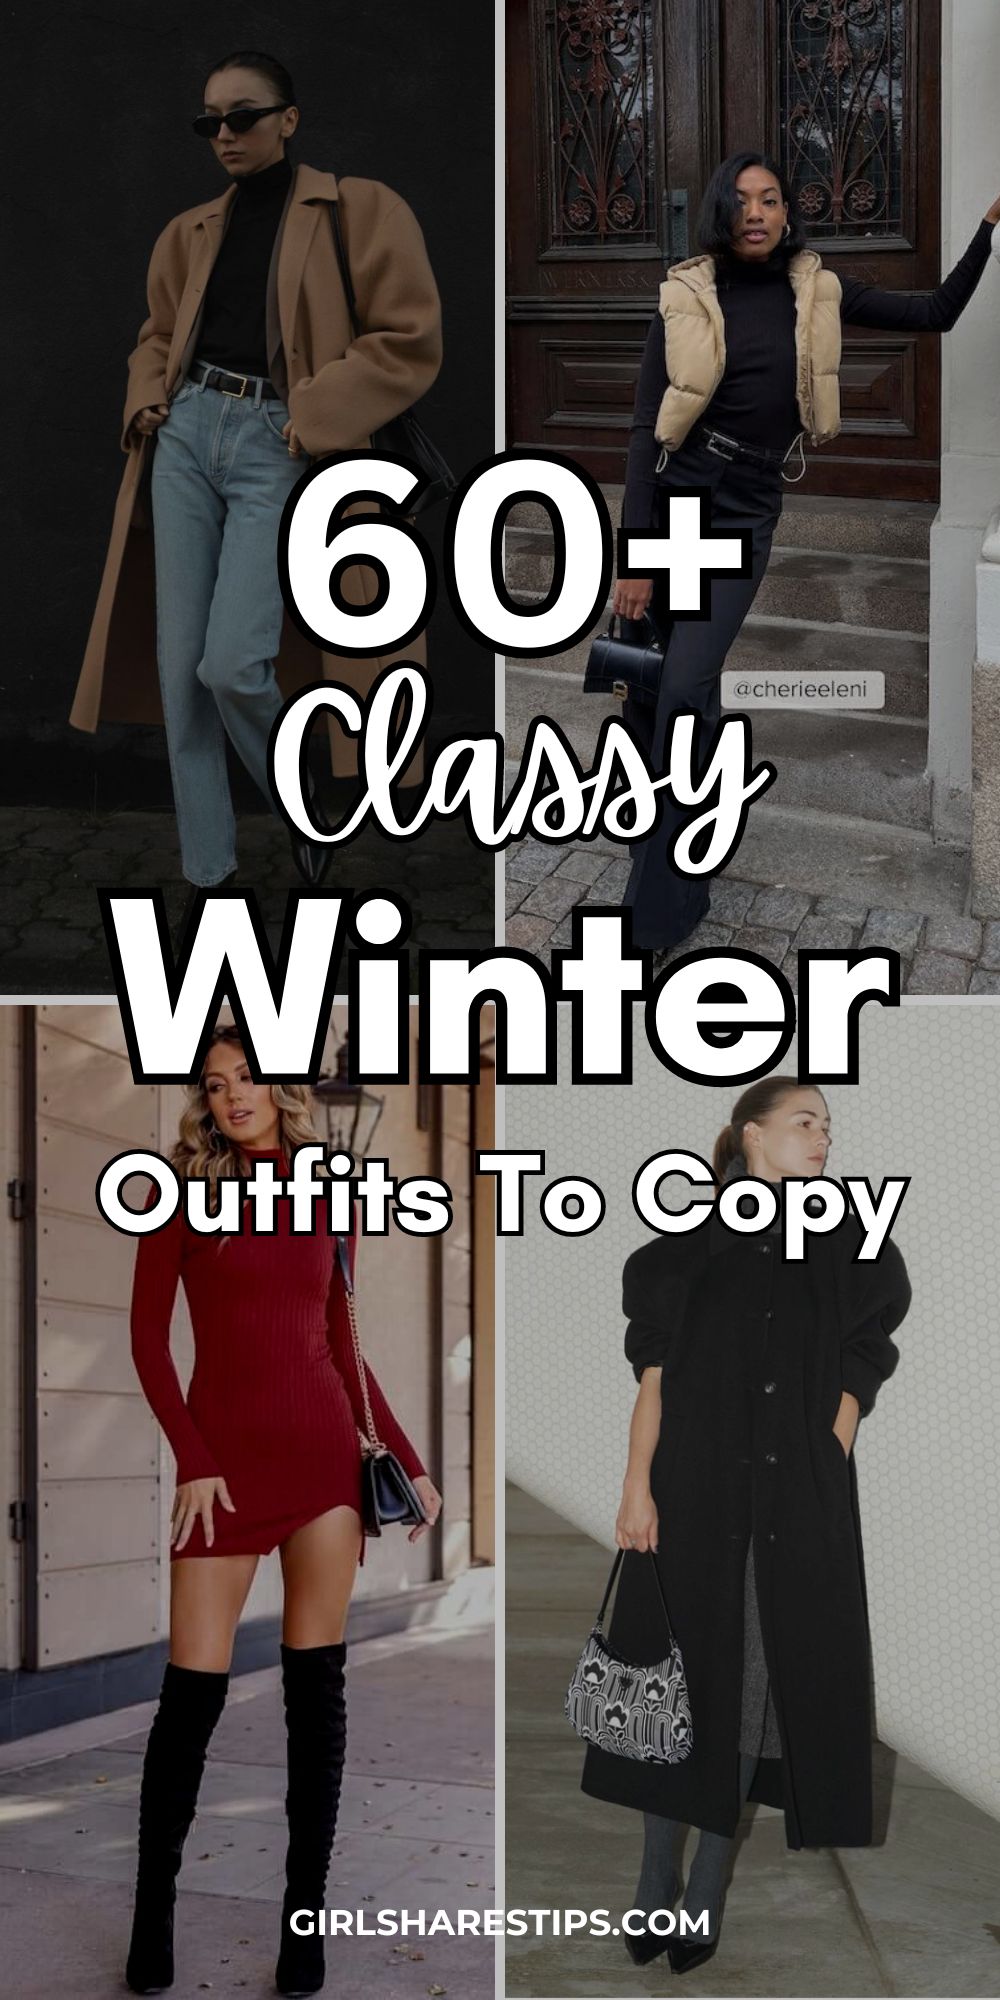 classy winter outfits ideas